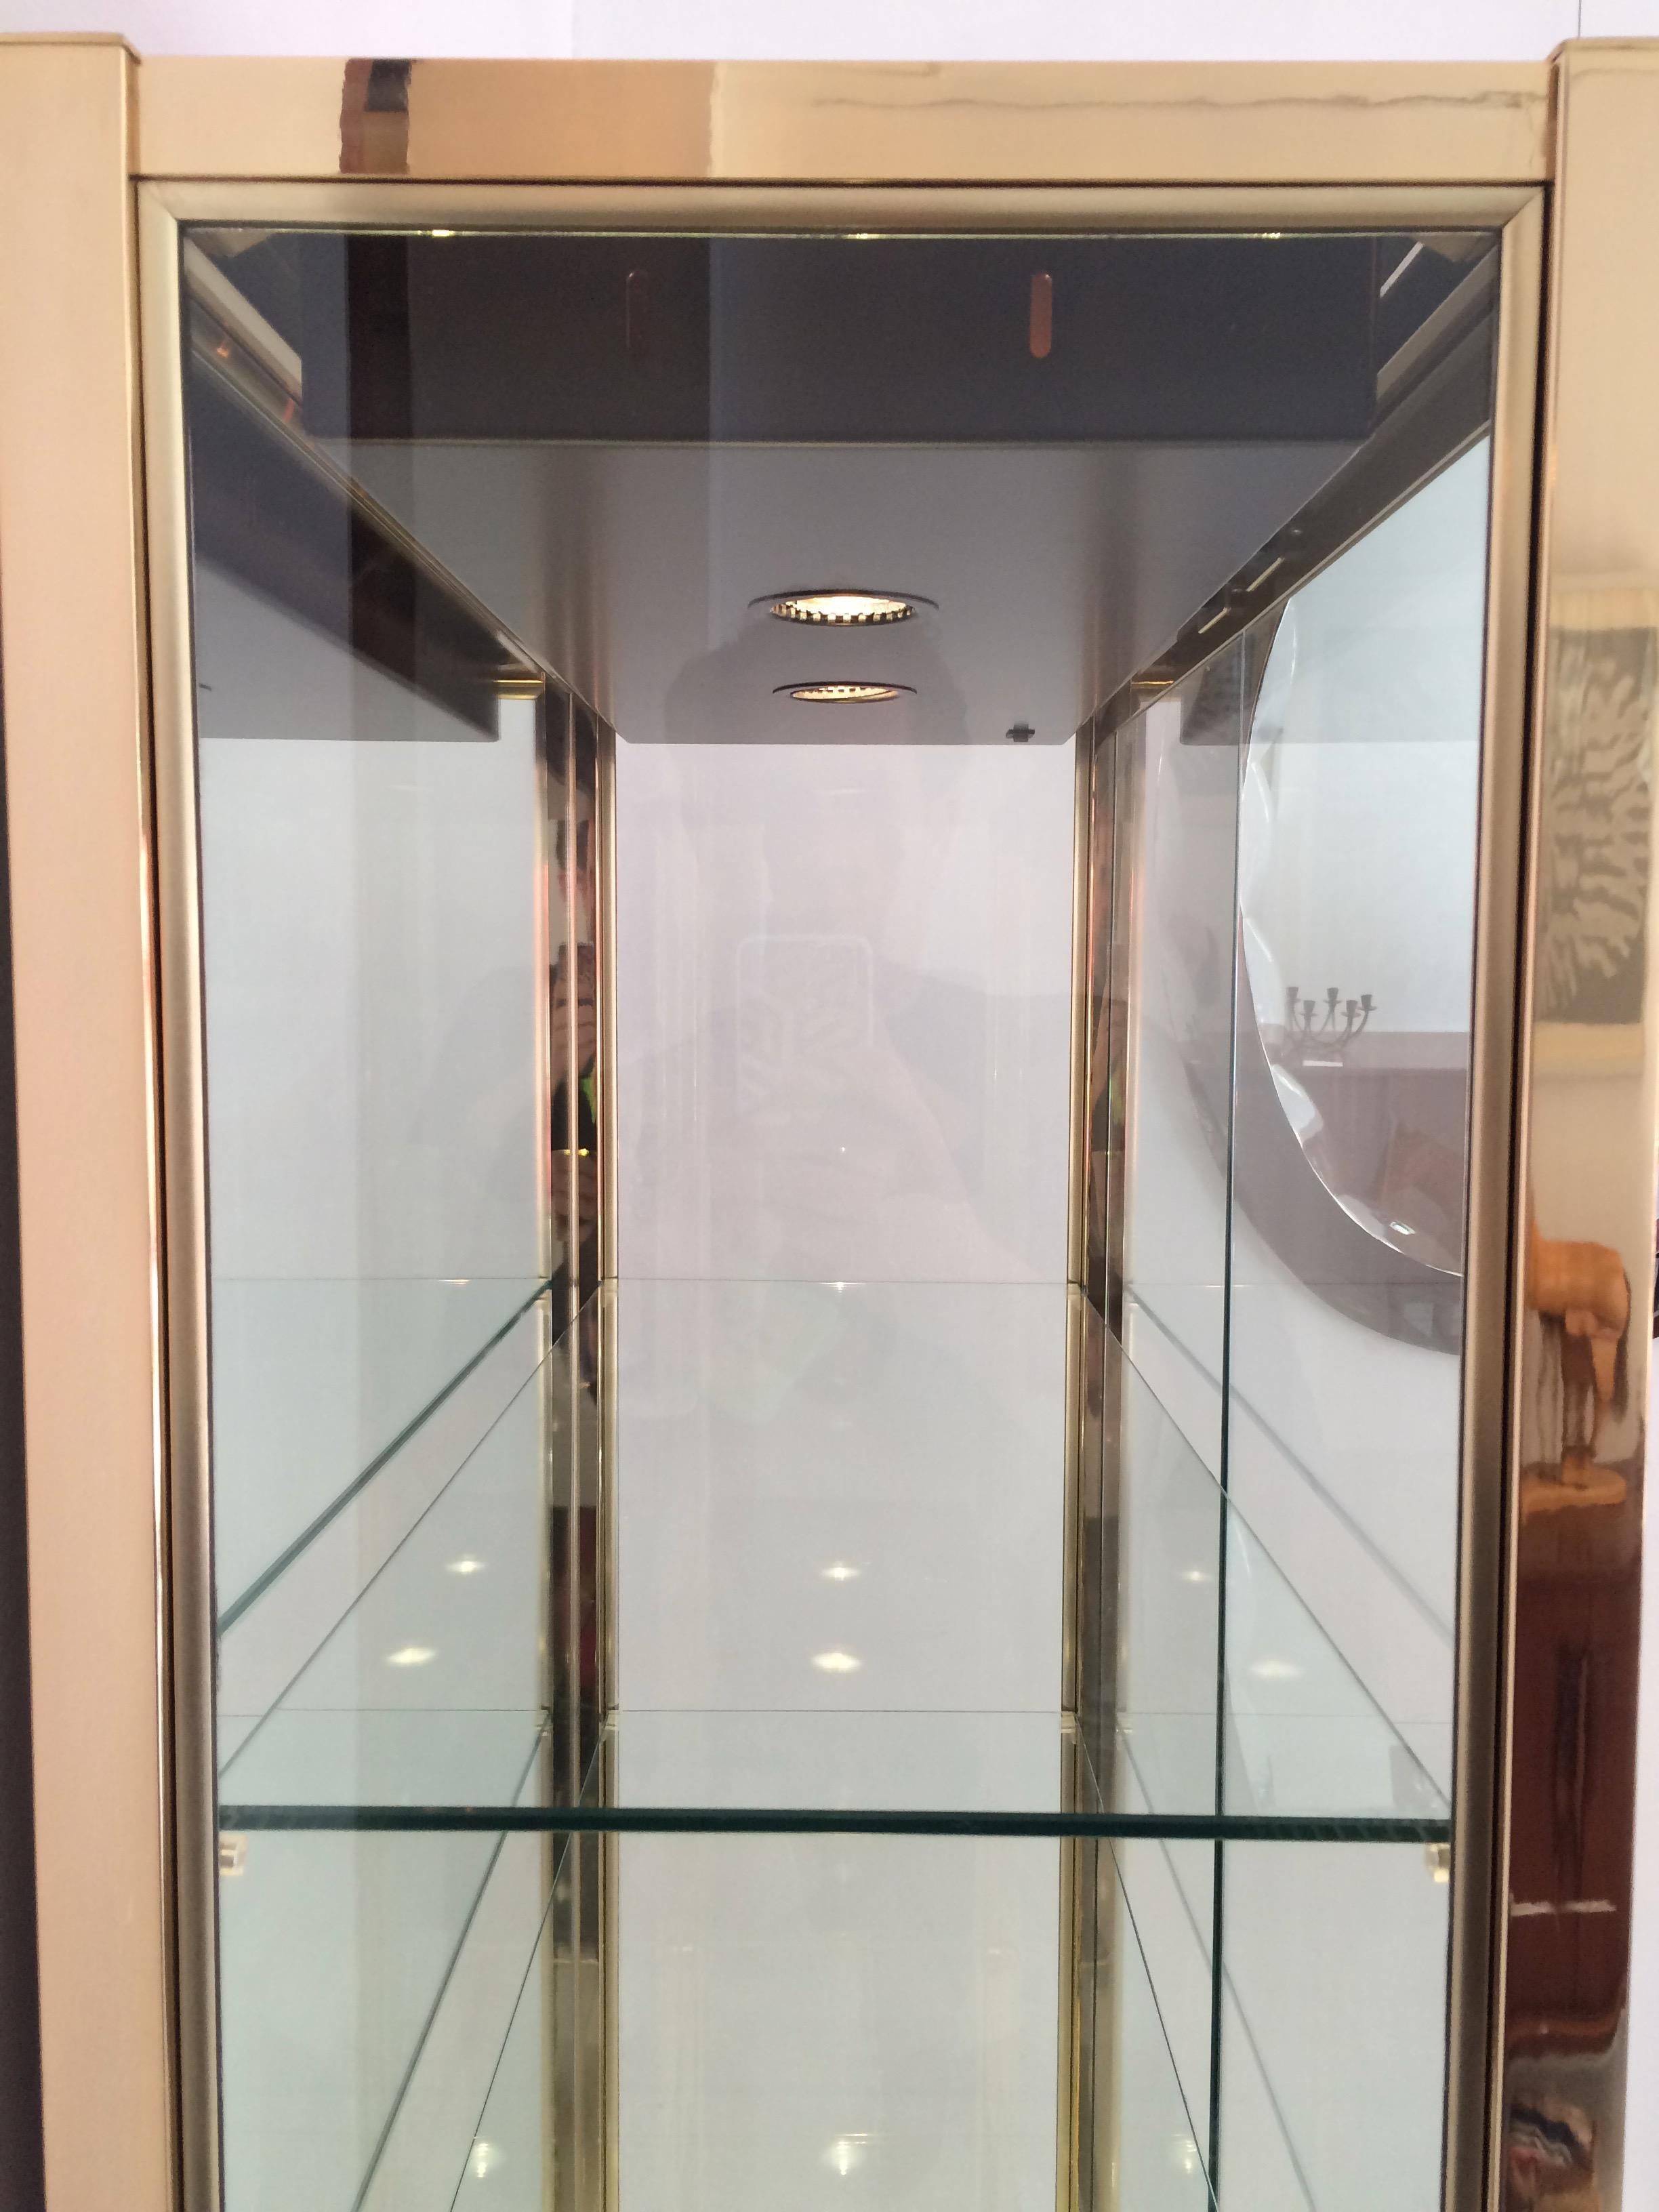 1970s Italian, illuminated, gold-chrome, display cabinet in the style of Renato Zevi.

This striking cabinet has two clear glass doors (non-lockable), glass sides with a mirrored glass back and base shelf.  Three adjustable toughened glass shelves